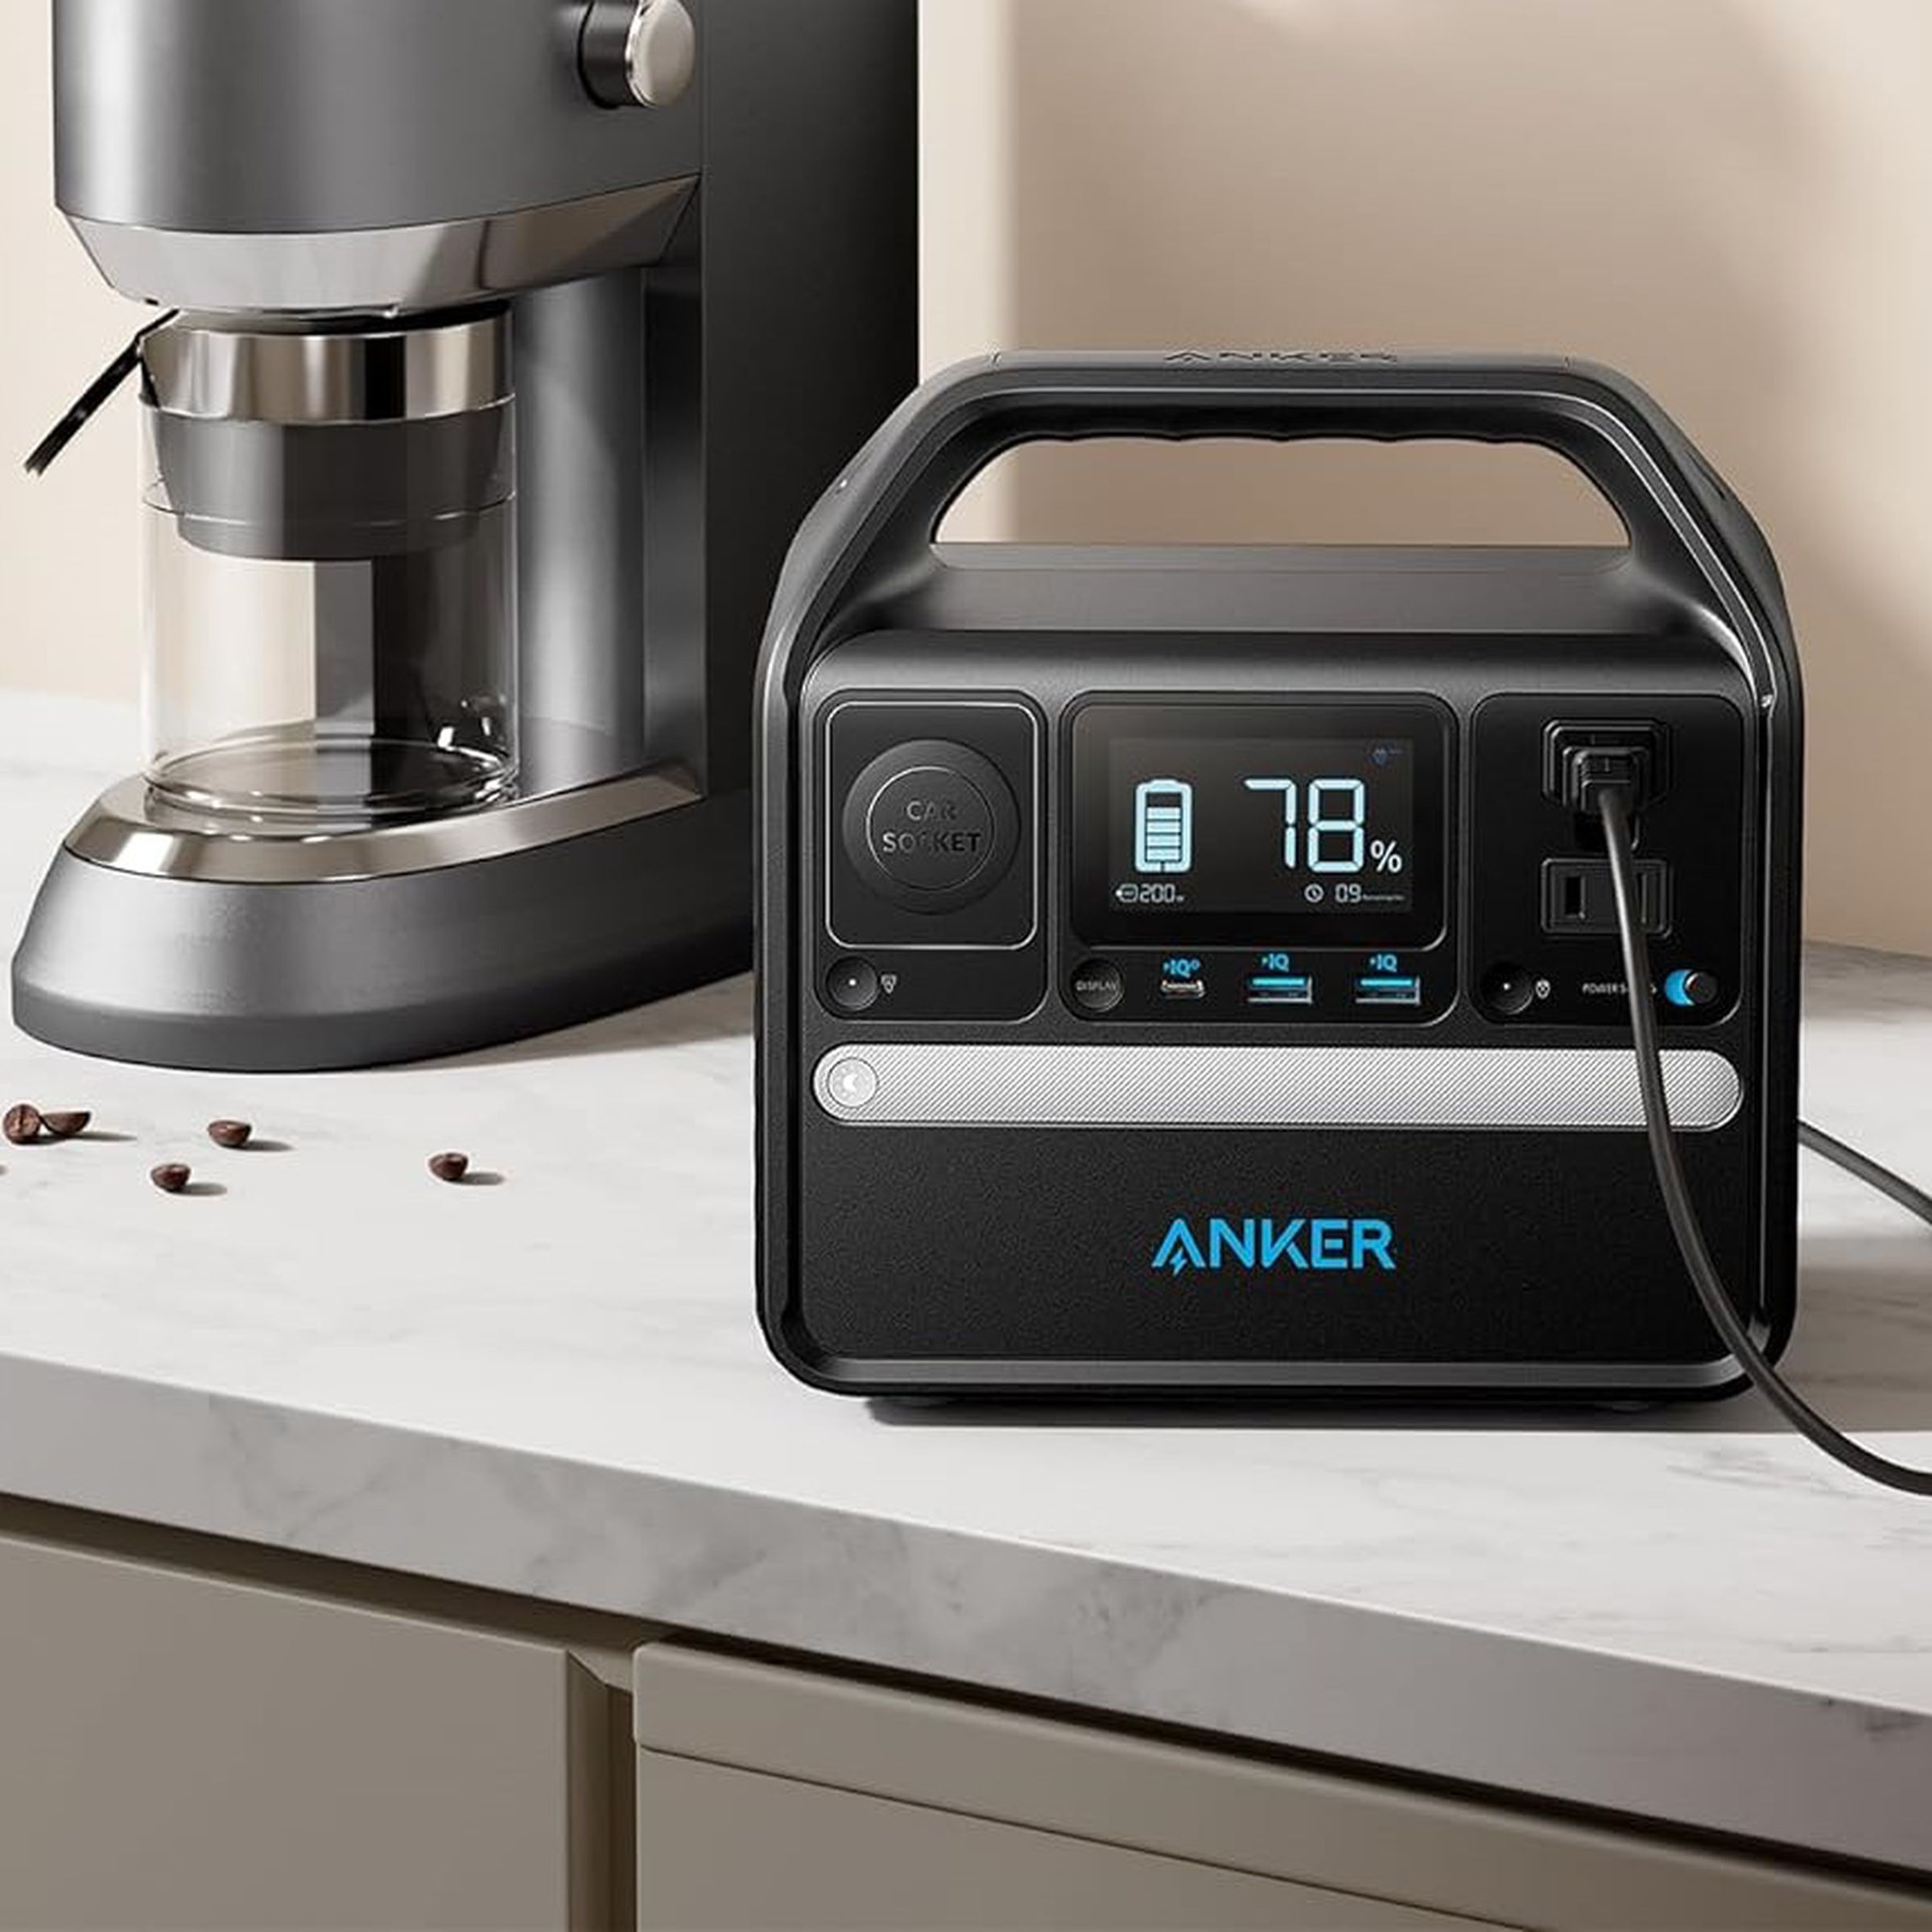 Anker 521 portable power station sitting on counter